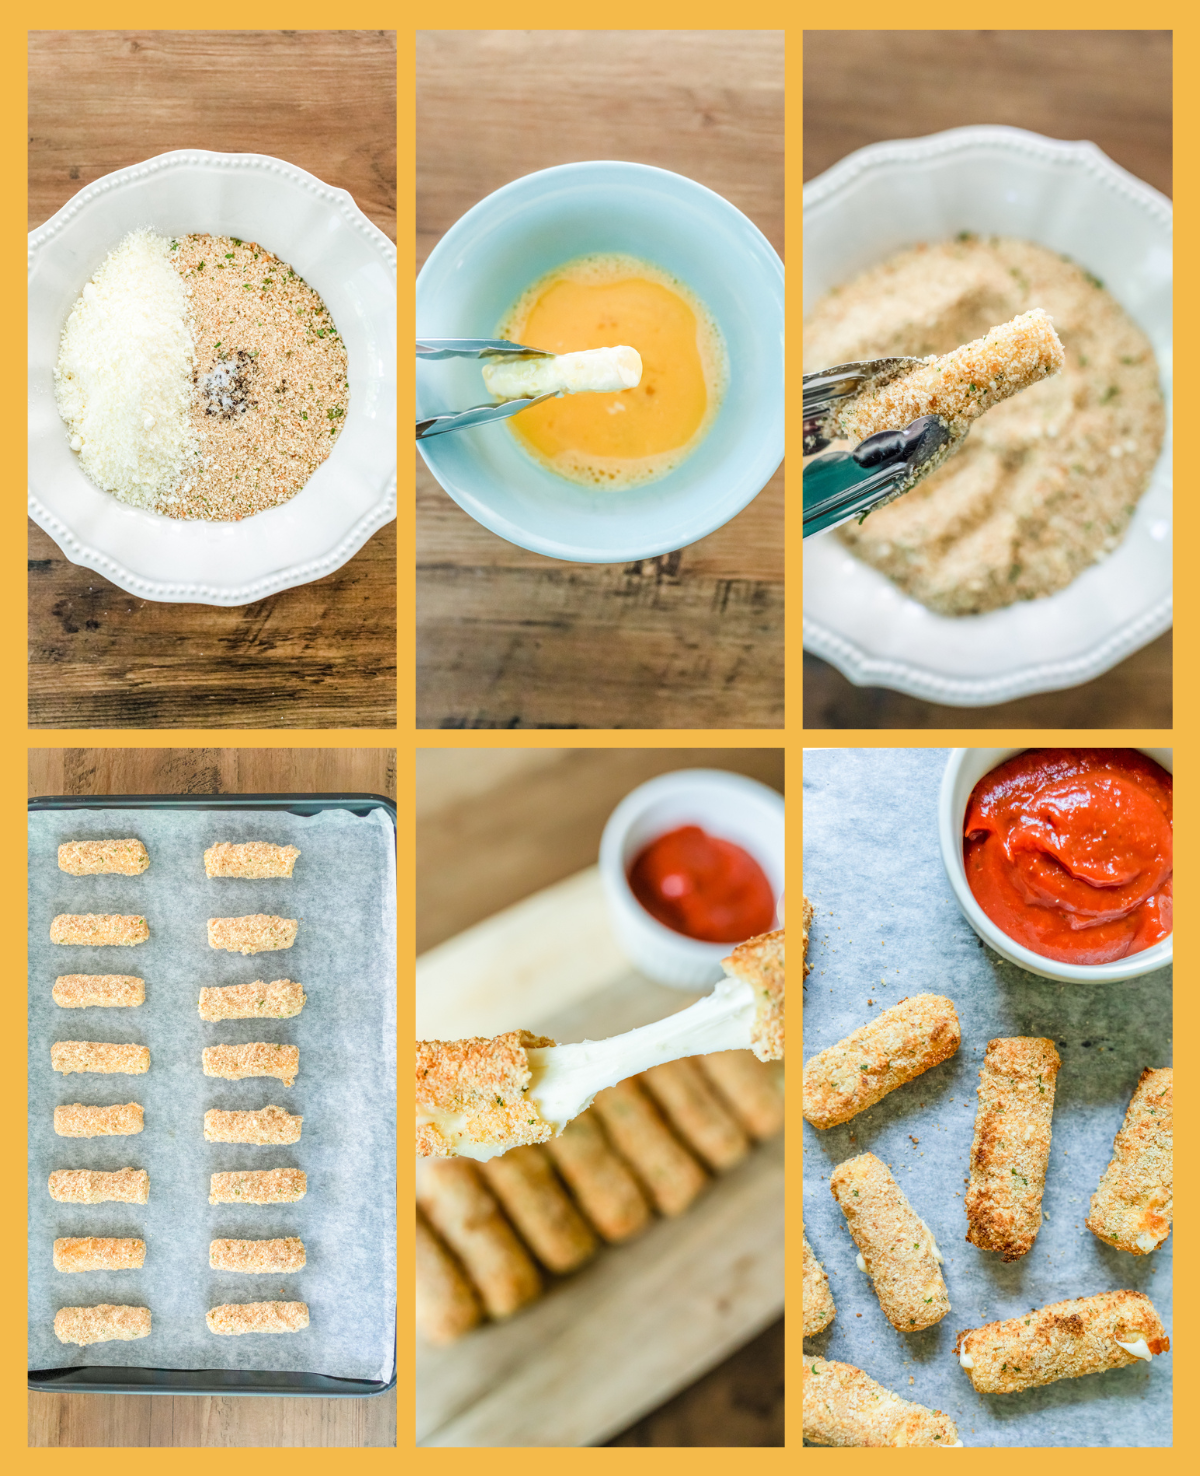 step by step process shots showing how to make air fryer mozzarella sticks using cheese sticks